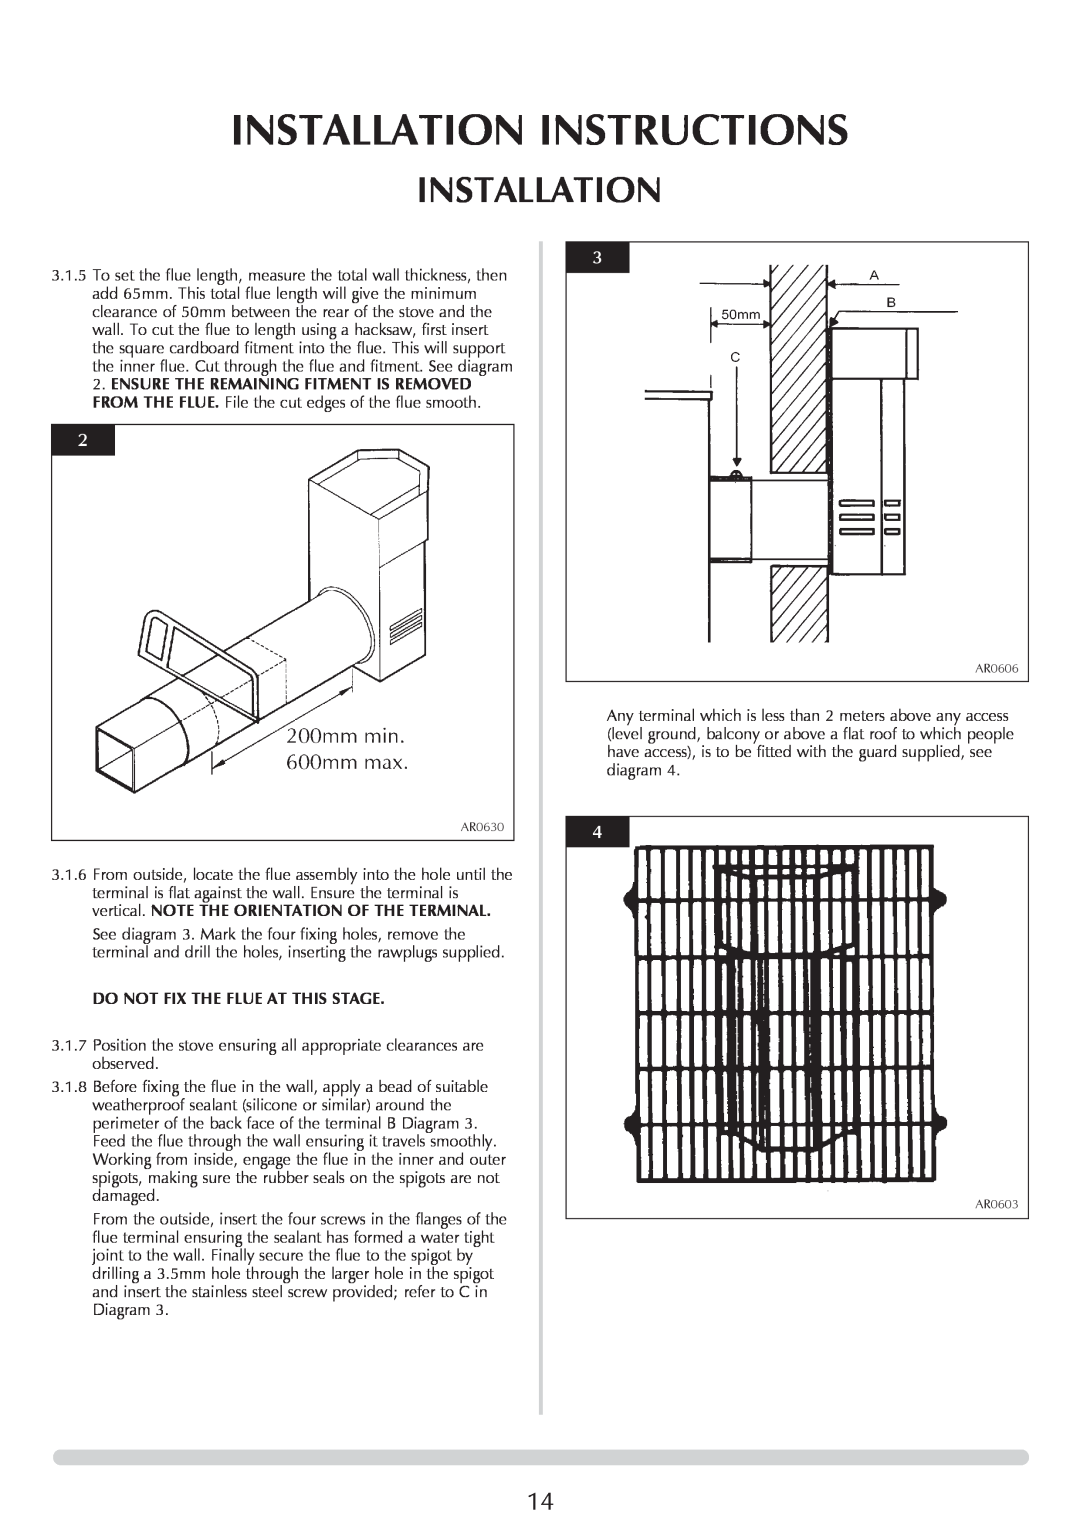 Stovax 8547LUC-P8547LUC, ASHDON 8546LUC-P8546LUC manual Installation Instructions, Do Not Fix The Flue At This Stage 